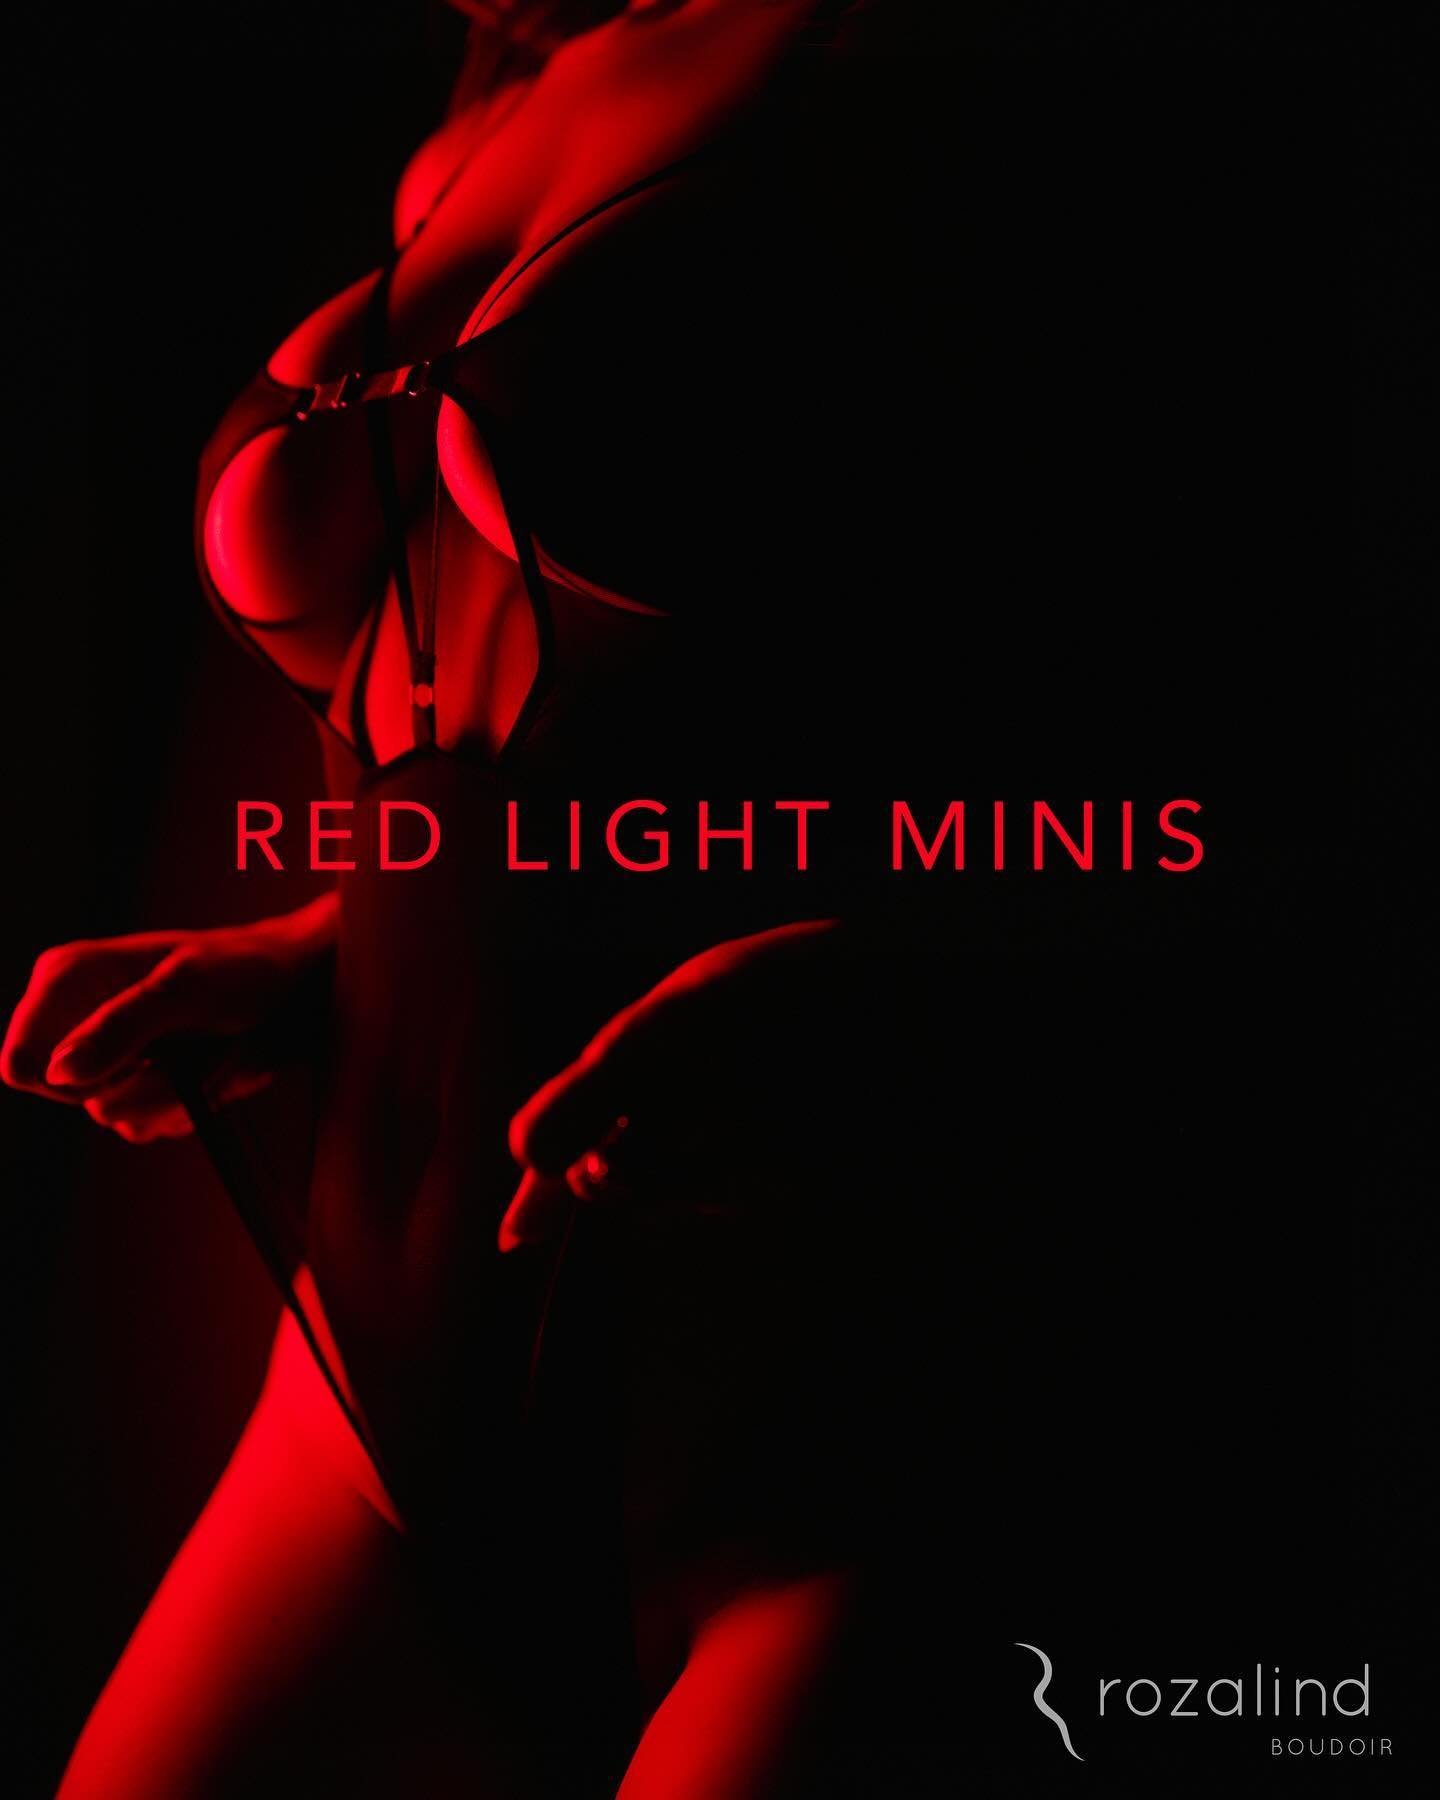 RED LIGHT/WET SET MINIS are LIVE!!! 

May 31 only - limited spots available 🔥 599 + gst 

And because I&rsquo;m SO stoked for these, I&rsquo;m going to do a give awayyyy for 1 spot! 🔥

*** RULES TO ENTER ***

✨ Follow @rozalindboudoir 

✨ Share thi